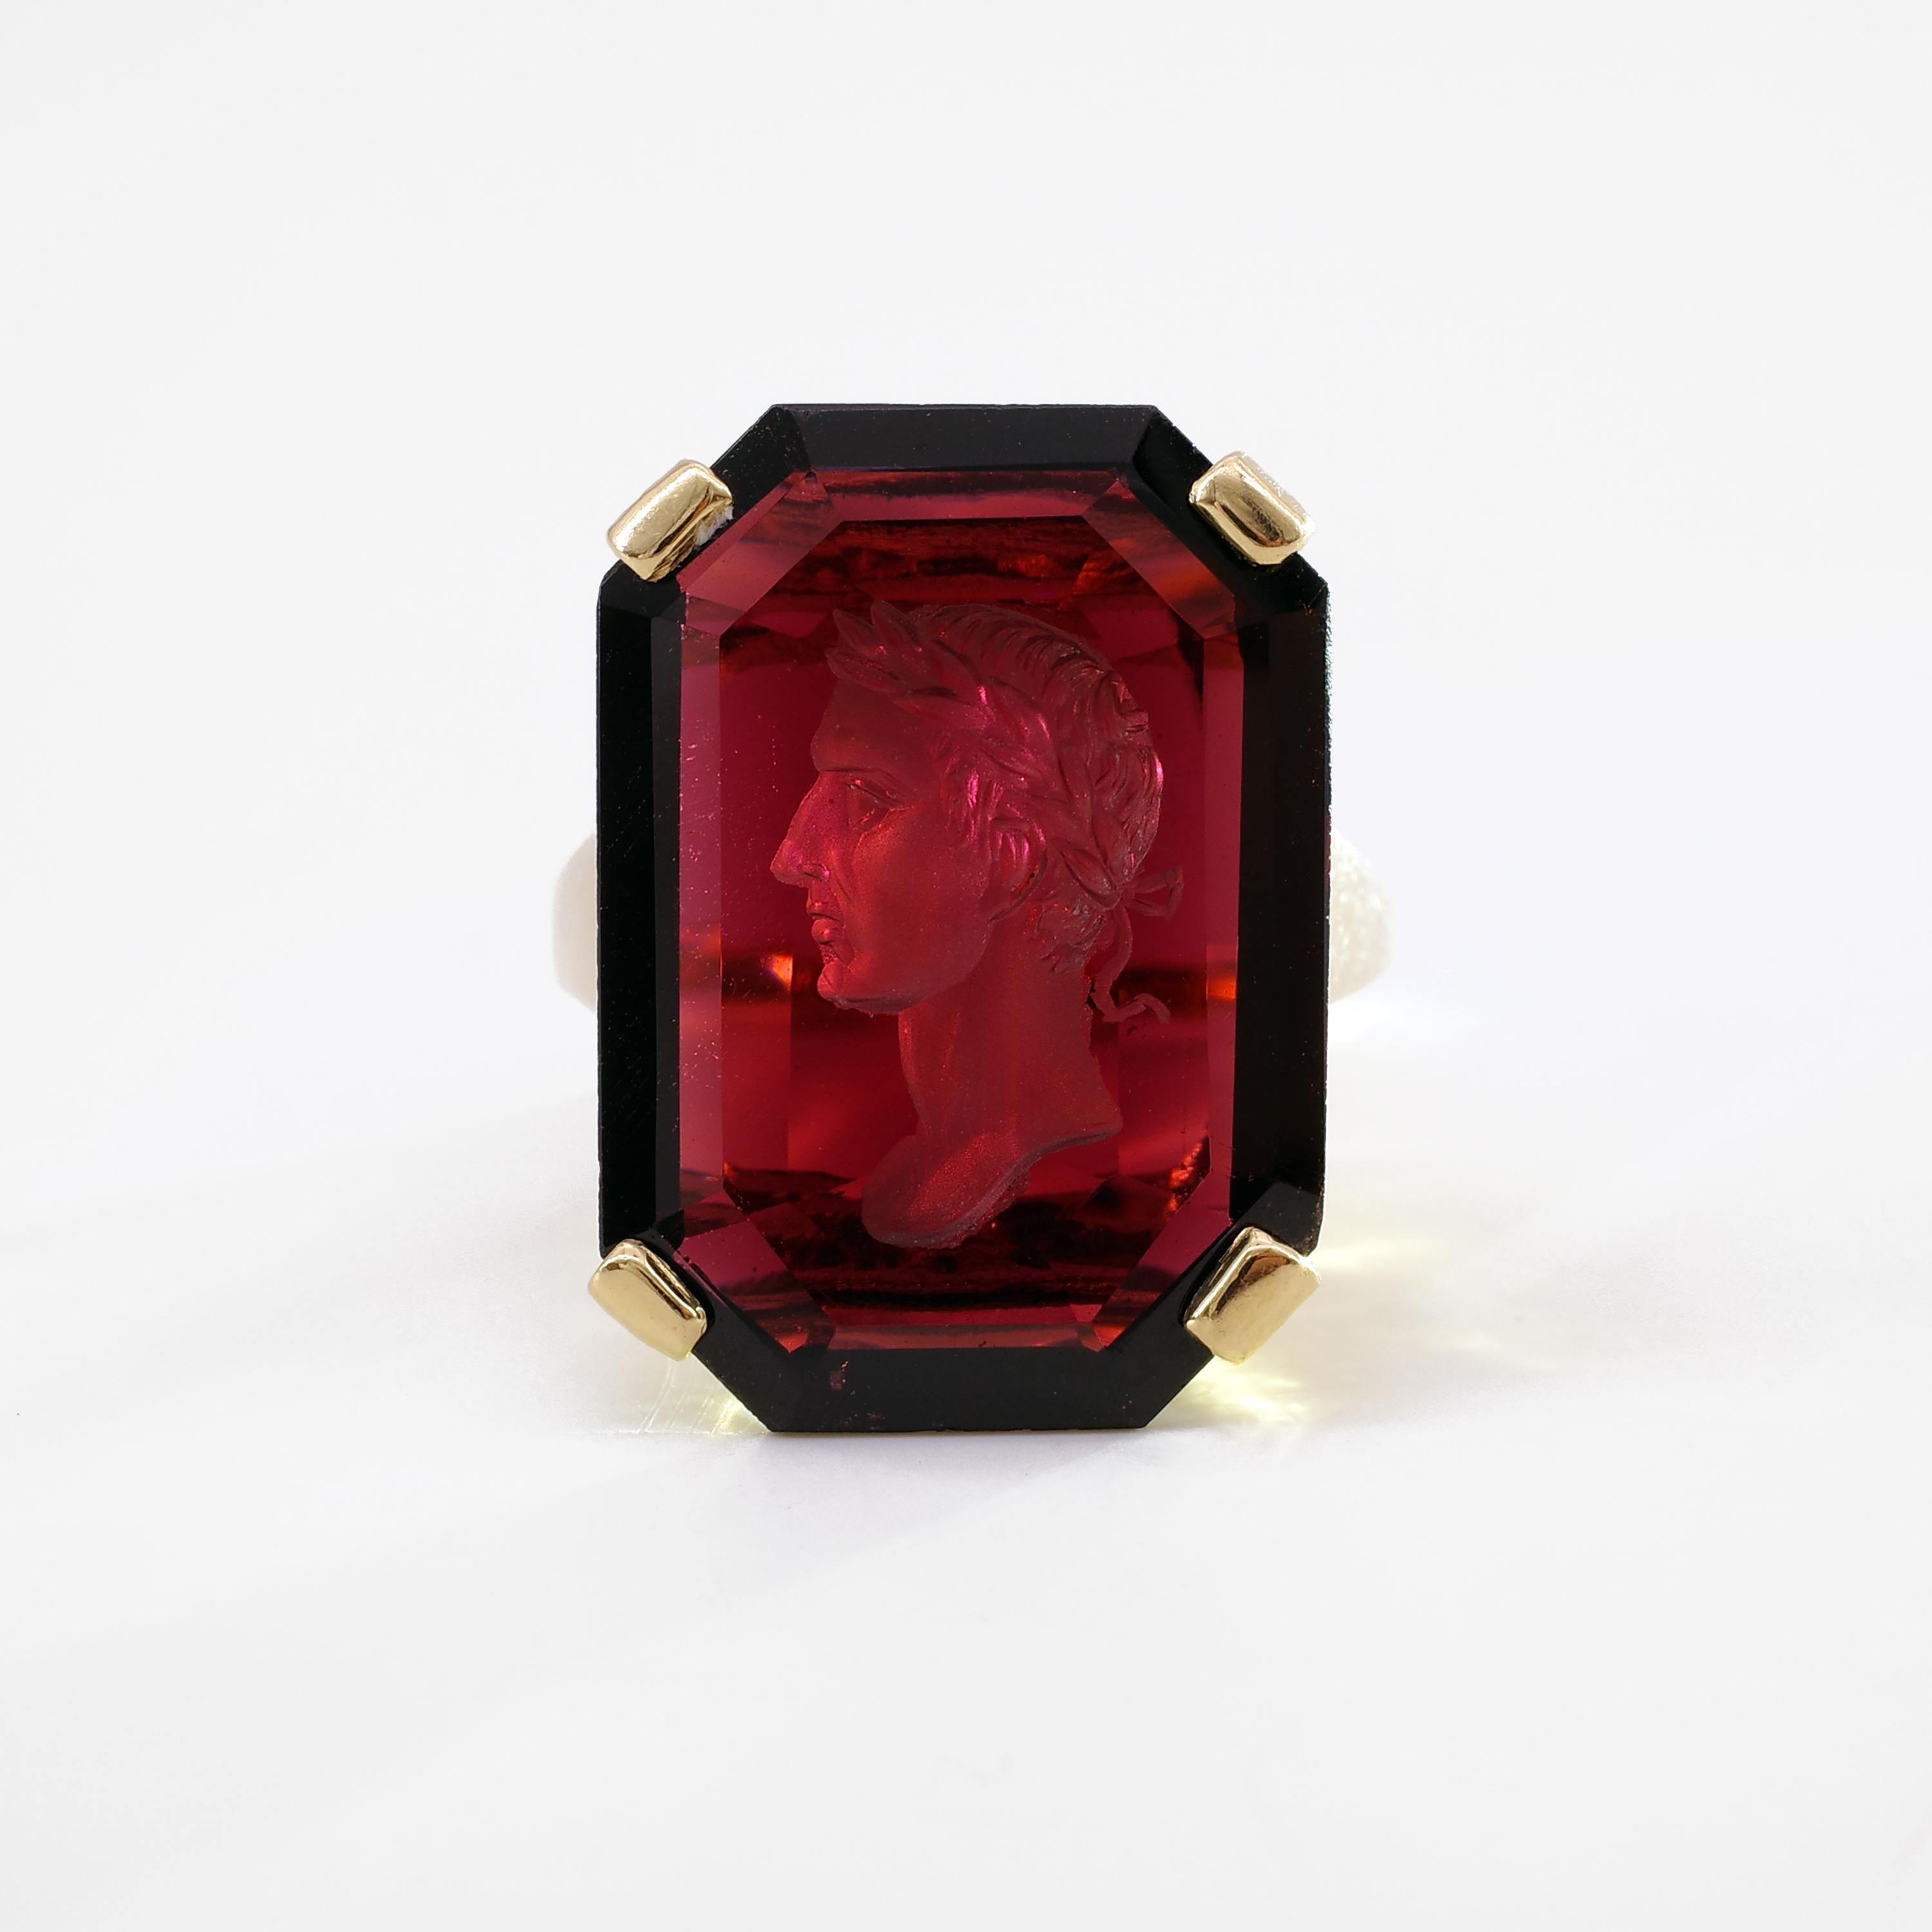 What a ring.

Let me start again: What. A. Ring.

This carved garnet intaglio is magnificently rendered; the details are stunning, evidenced in the images. I believe the intaglio itself is older than the setting. My best educated guess would be